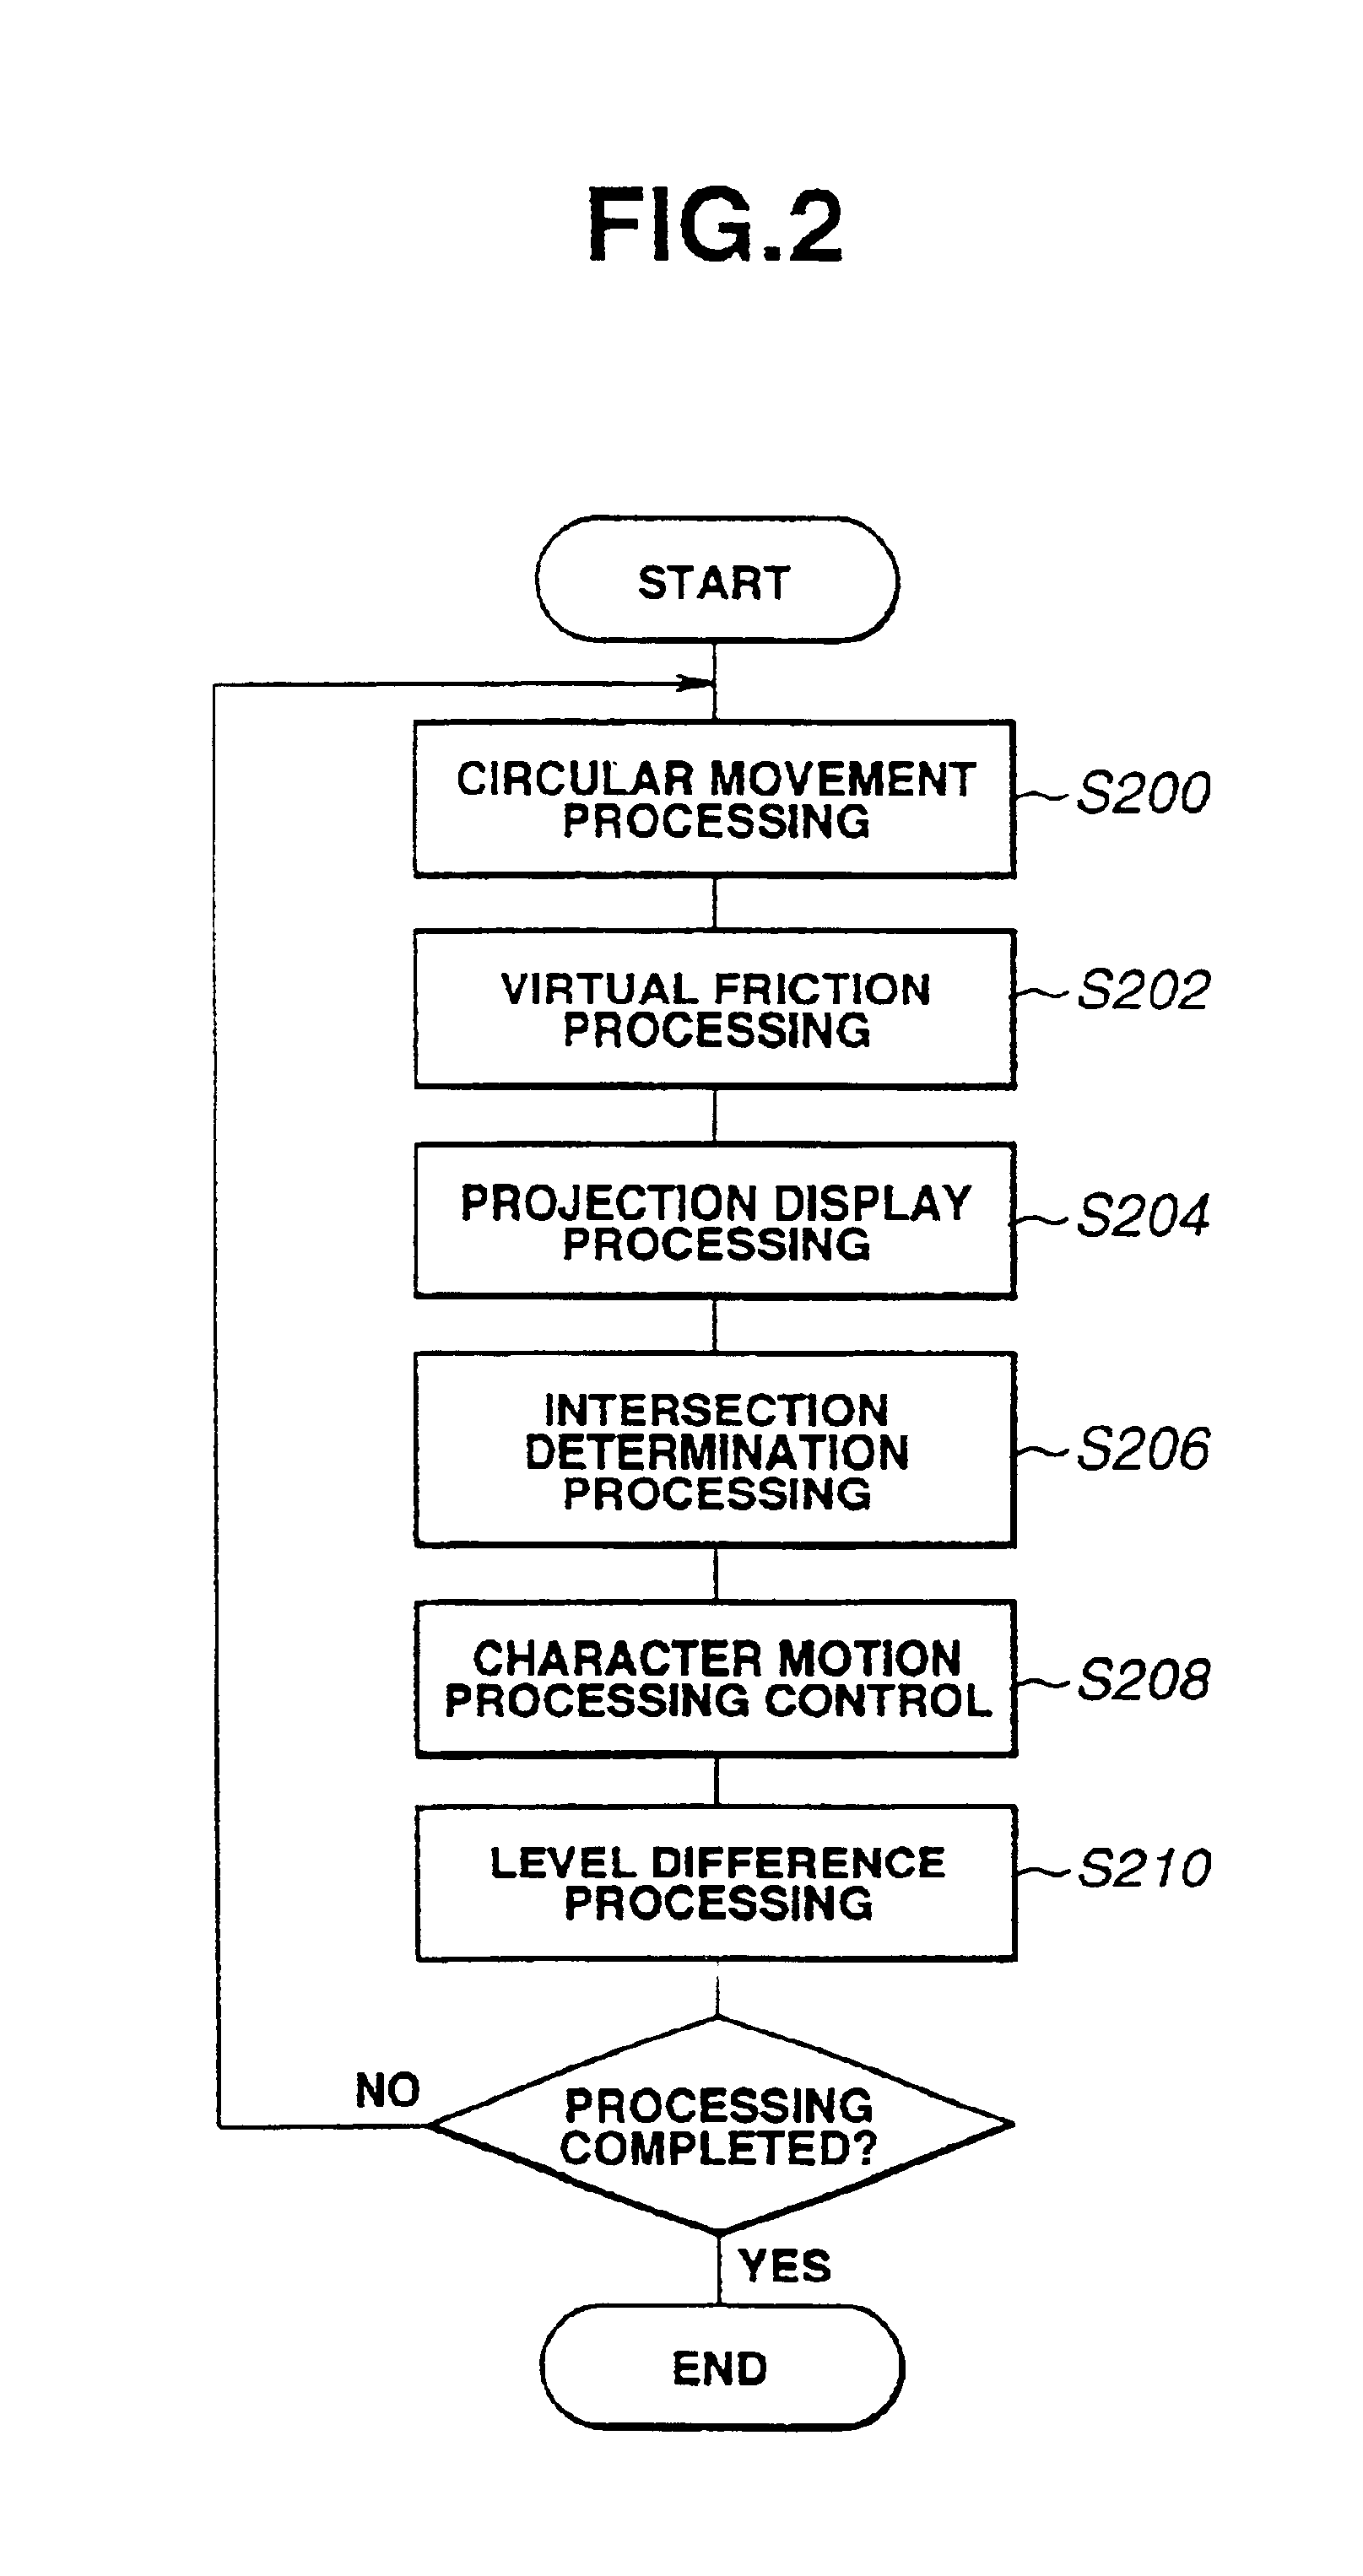 Image processing apparatus for a game, method and program for image processing for a game, and computer-readable medium